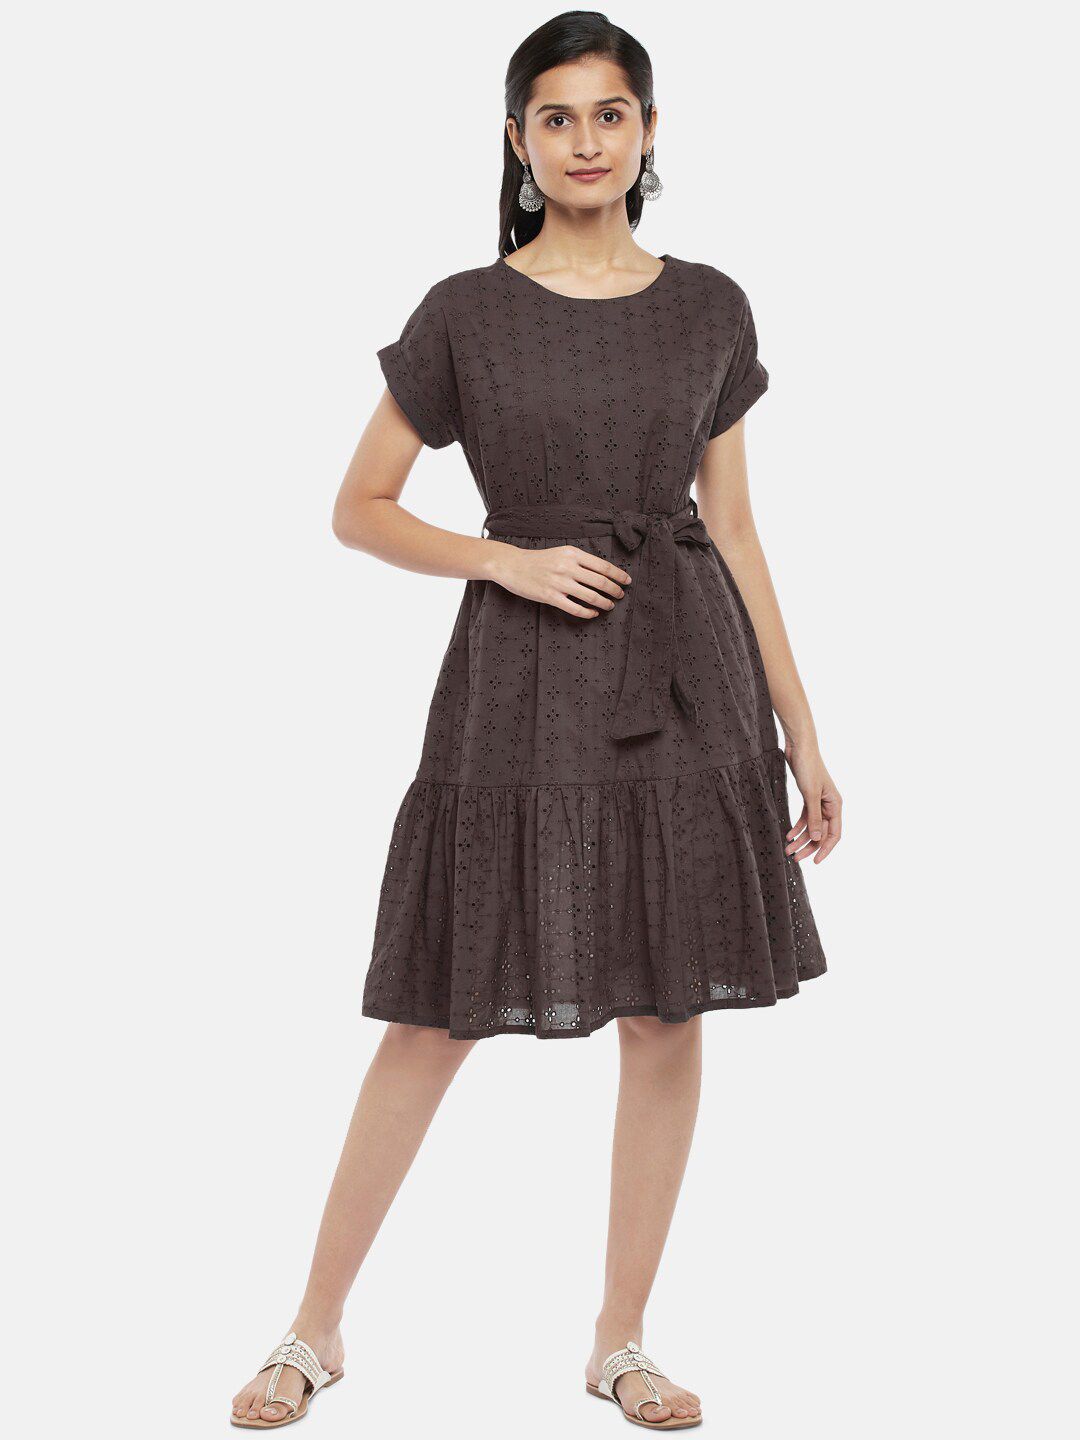 AKKRITI BY PANTALOONS Grey A-Line Dress Price in India